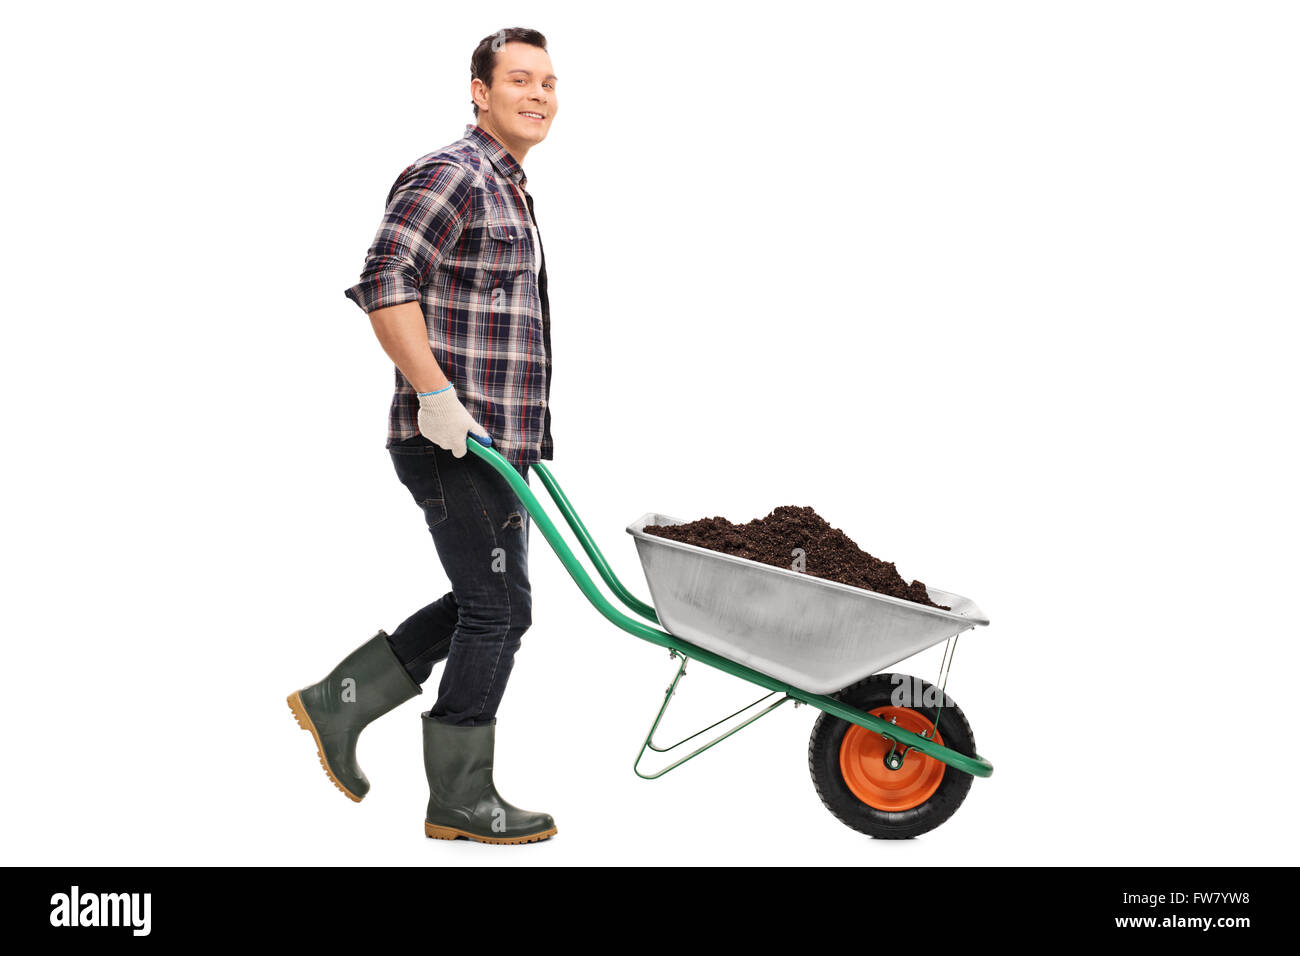 Full length portrait of a young gardener pushing a wheelbarrow full of dirt isolated on white background Stock Photo